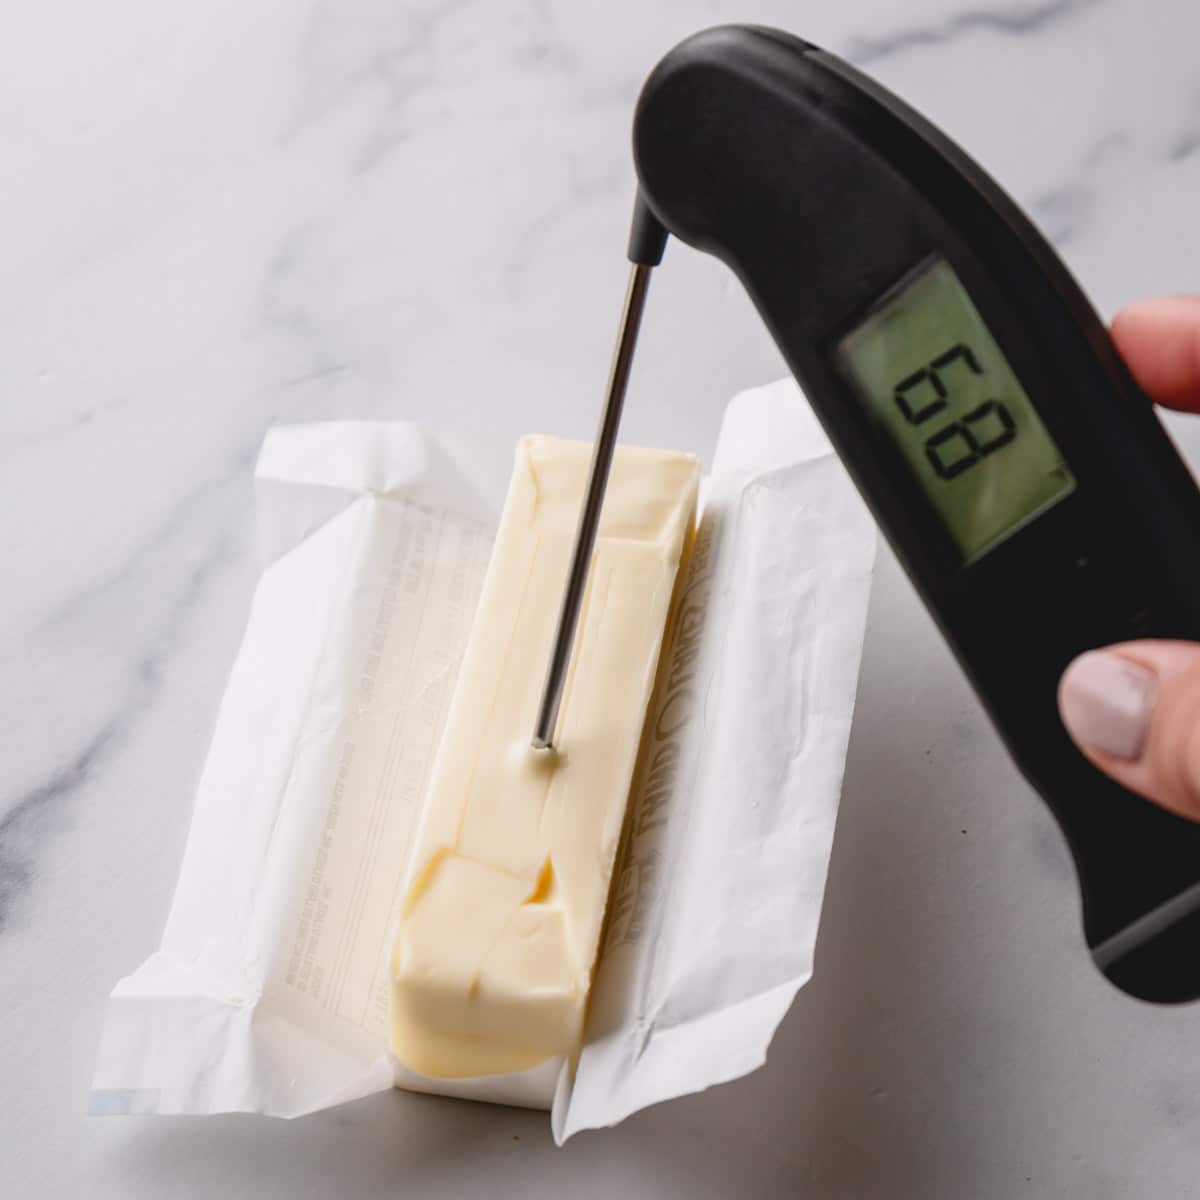 A stick of butter with inserted instant thermometer at 68°F.